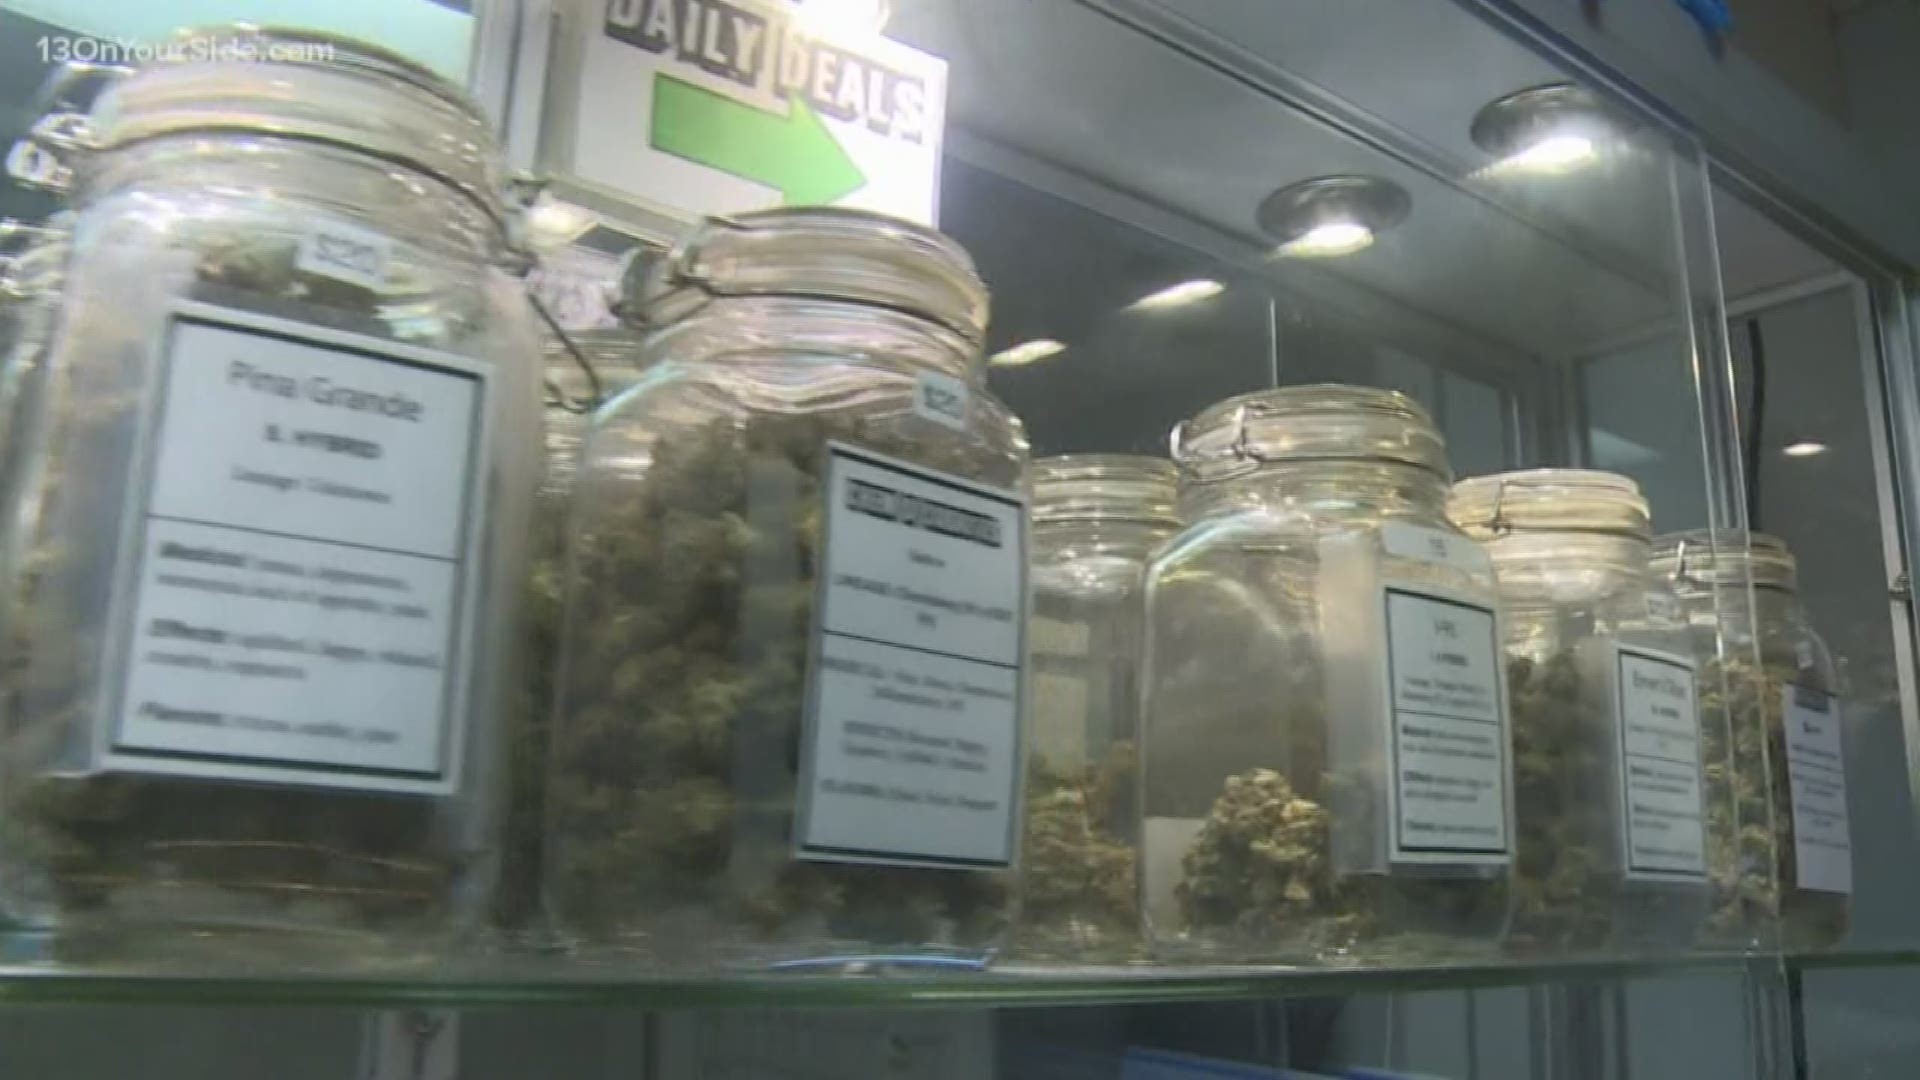 More than 1,300 communities have said no to marijuana businesses after the statewide elections this week.